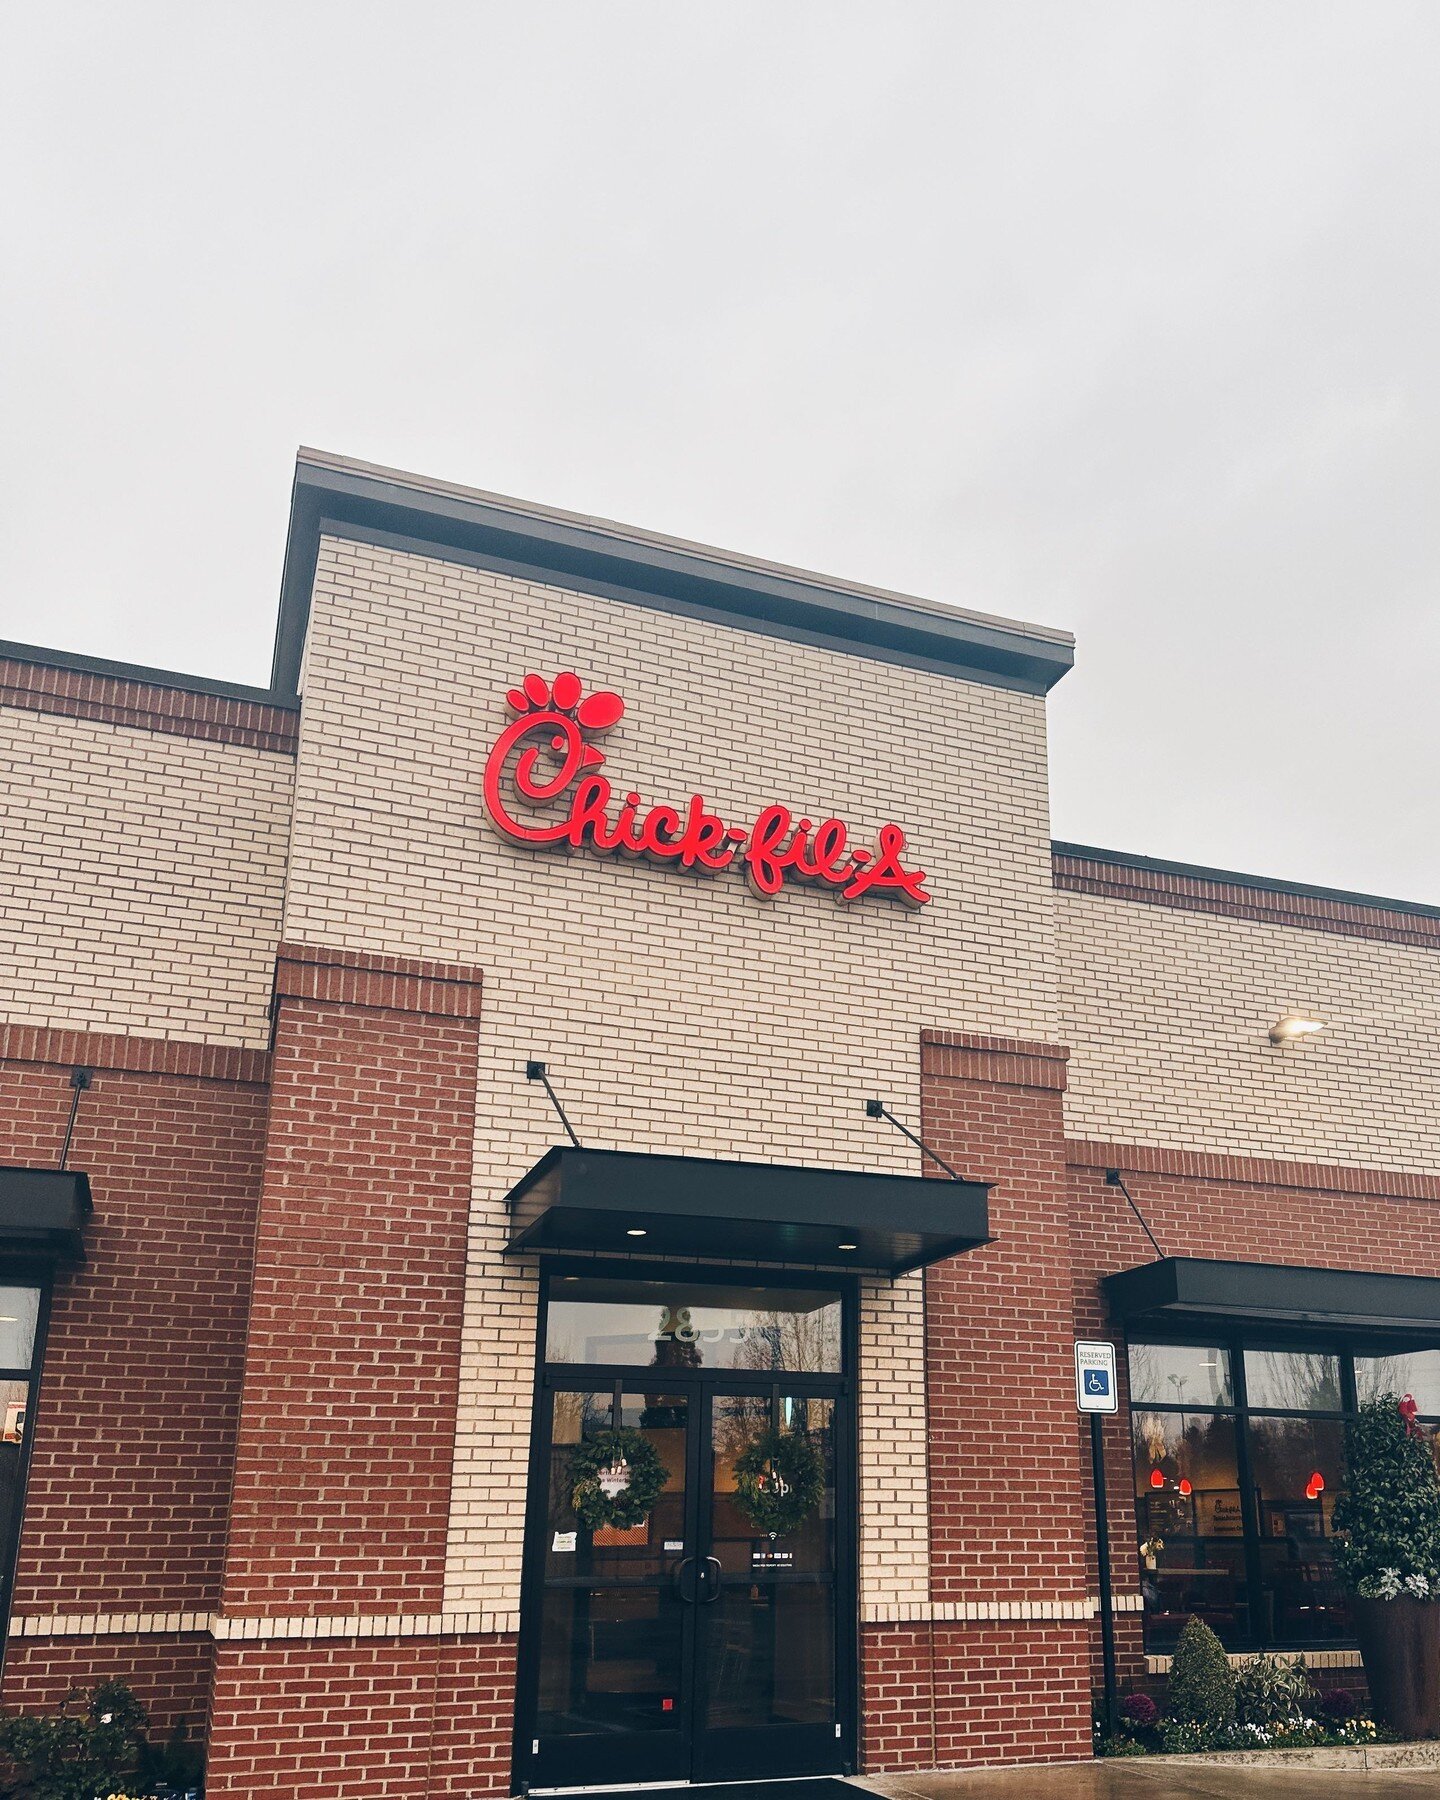 ✨ Happy Friday! ✨

Make the most of this marvelous day and enjoy it to the fullest! 

.
.
.
.
.
#chickfila #chicken #food #thelittlethings #hillsboroeats #sandwich #nuggets #sauce #tanasbourne #pdx #portland #eatmorchikin #pdxfood #portlandnw #cfatan